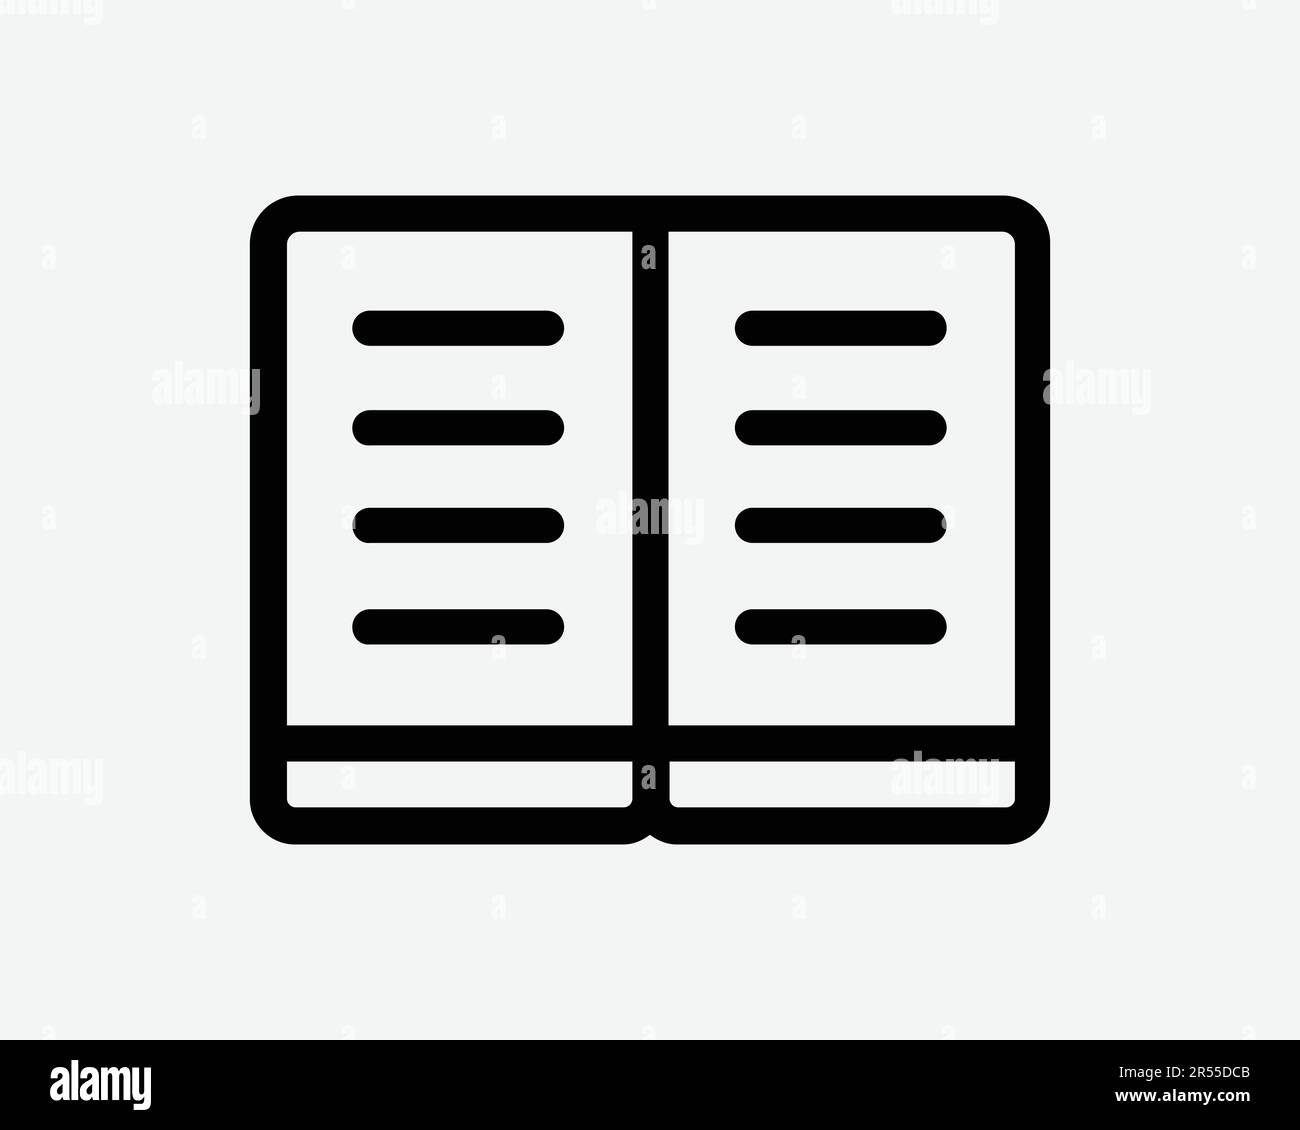 Open Book Flat Icon. Library Literature Read Textbook Page Dictionary School Text Sign Symbol Black Artwork Graphic Illustration Clipart EPS Vector Stock Vector